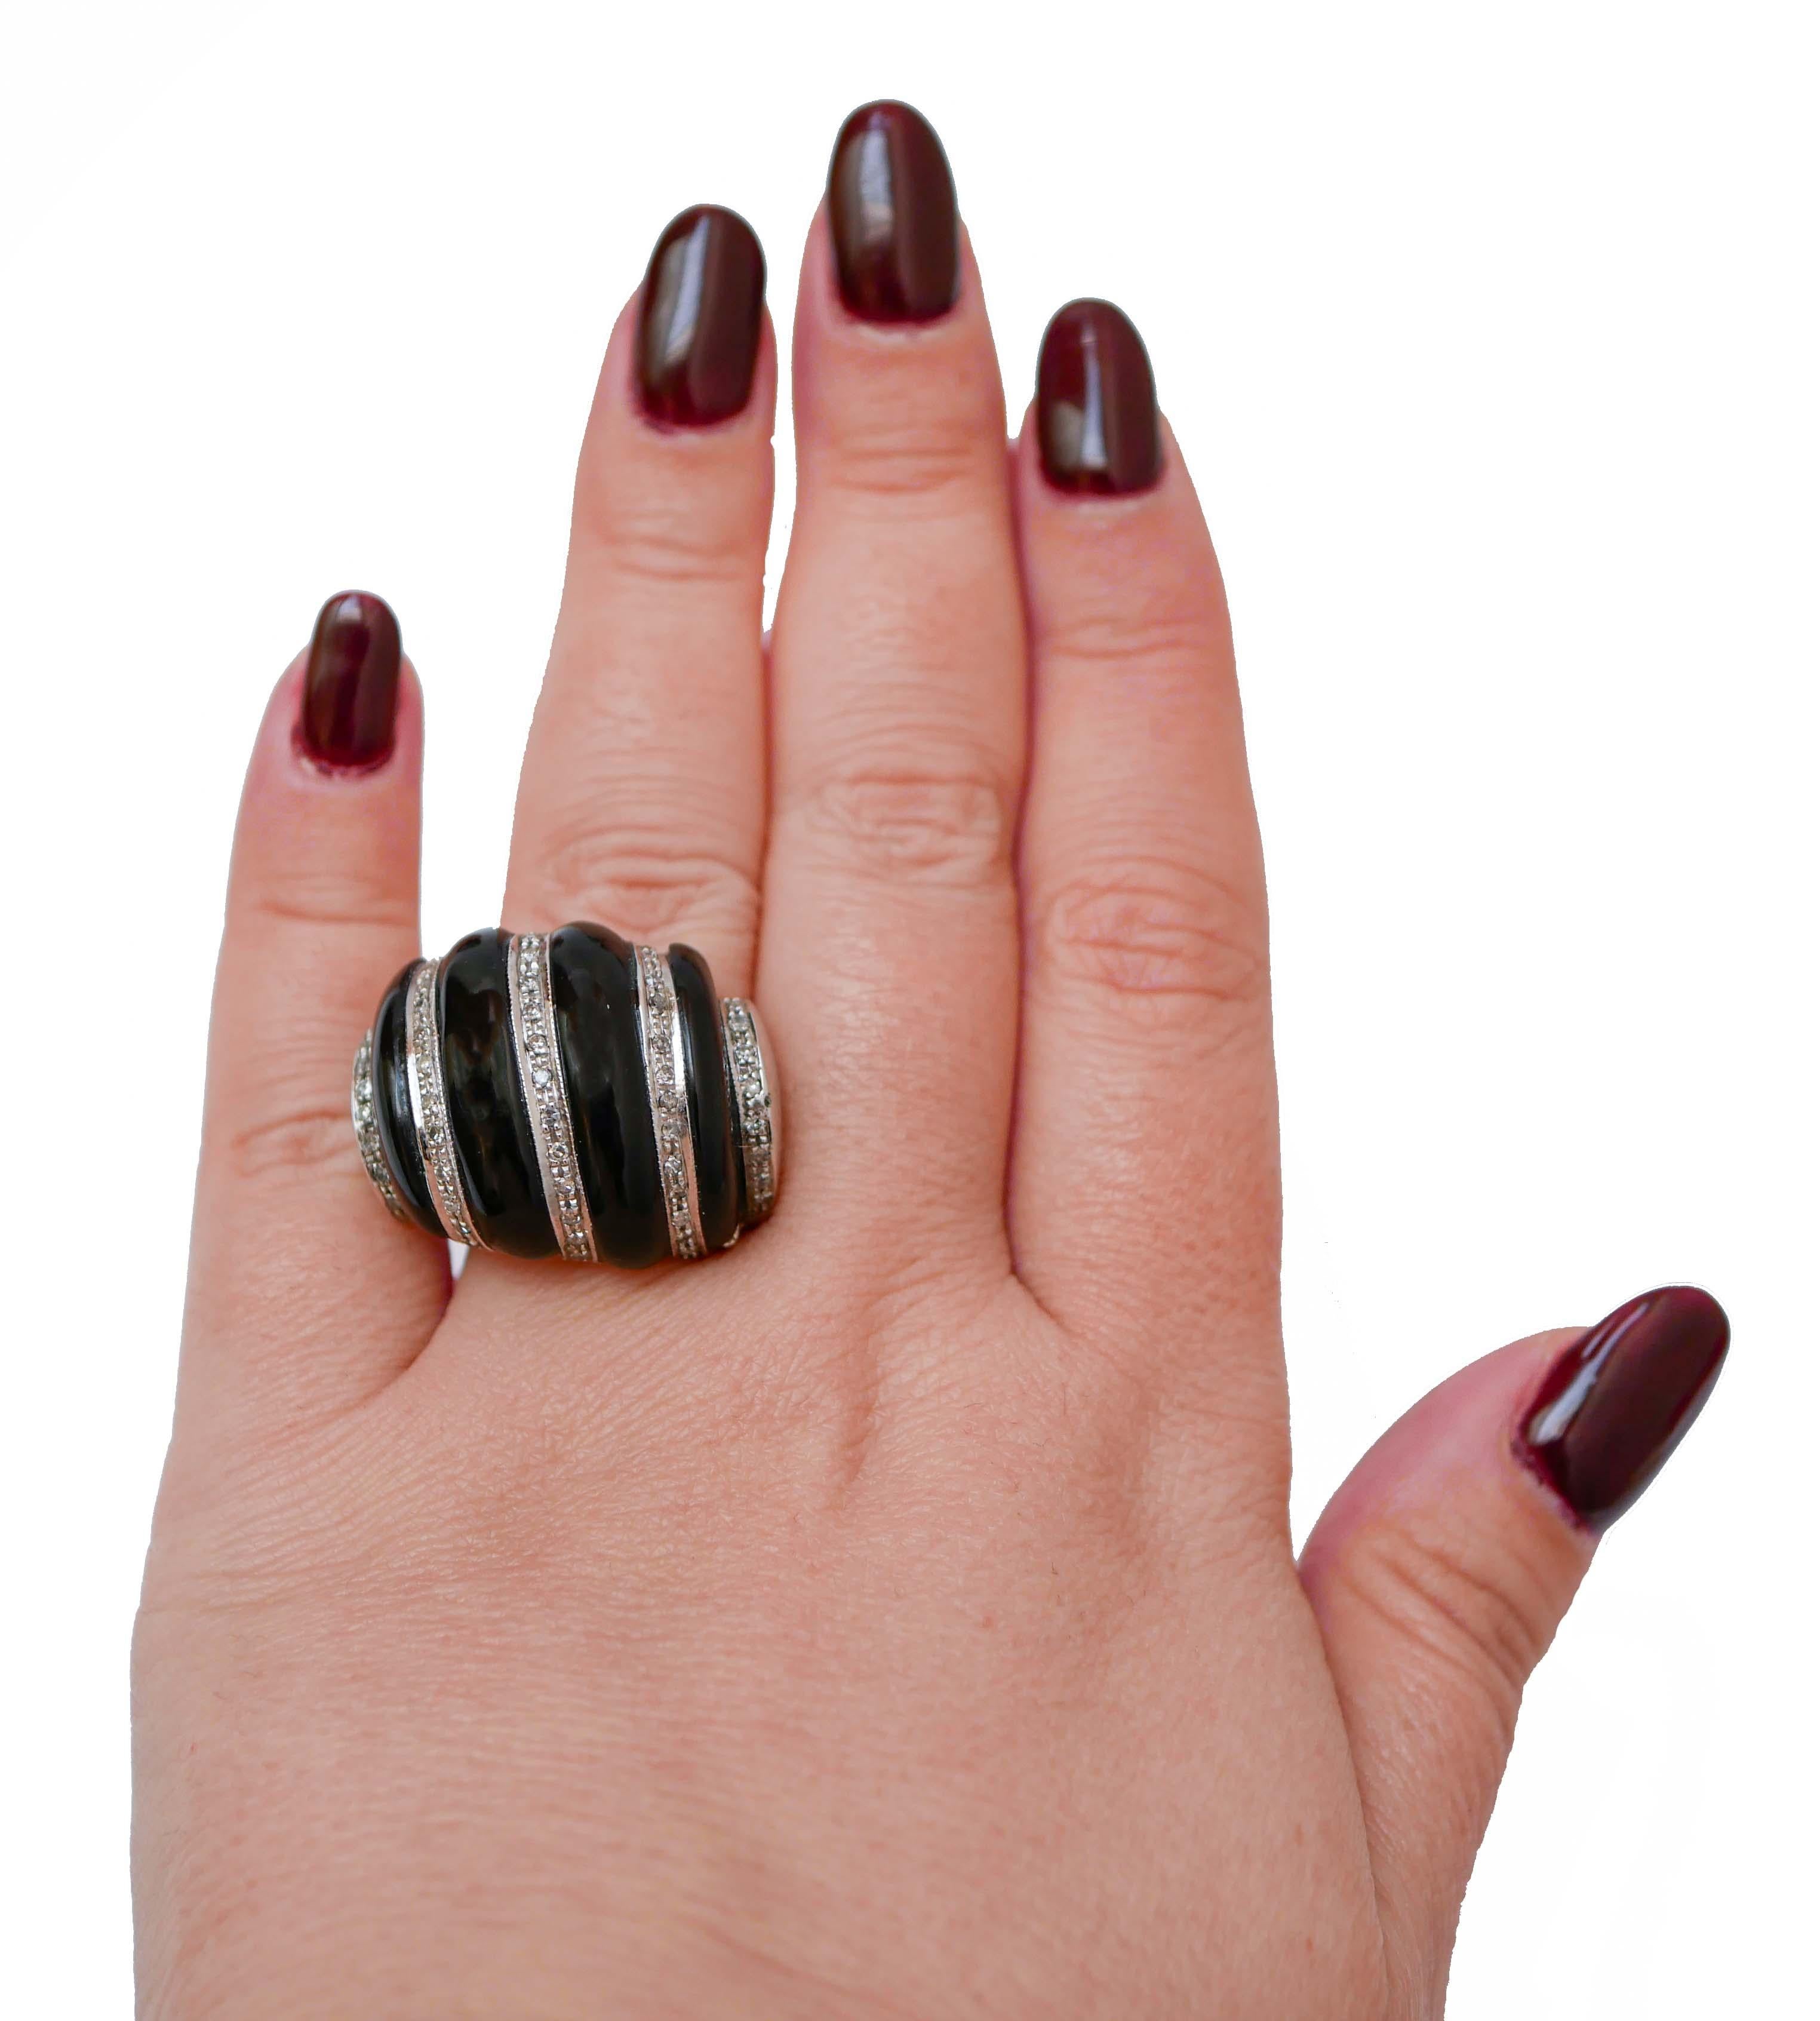 Mixed Cut Onyx, Diamonds, 14 Karat White Gold Dome Ring. For Sale